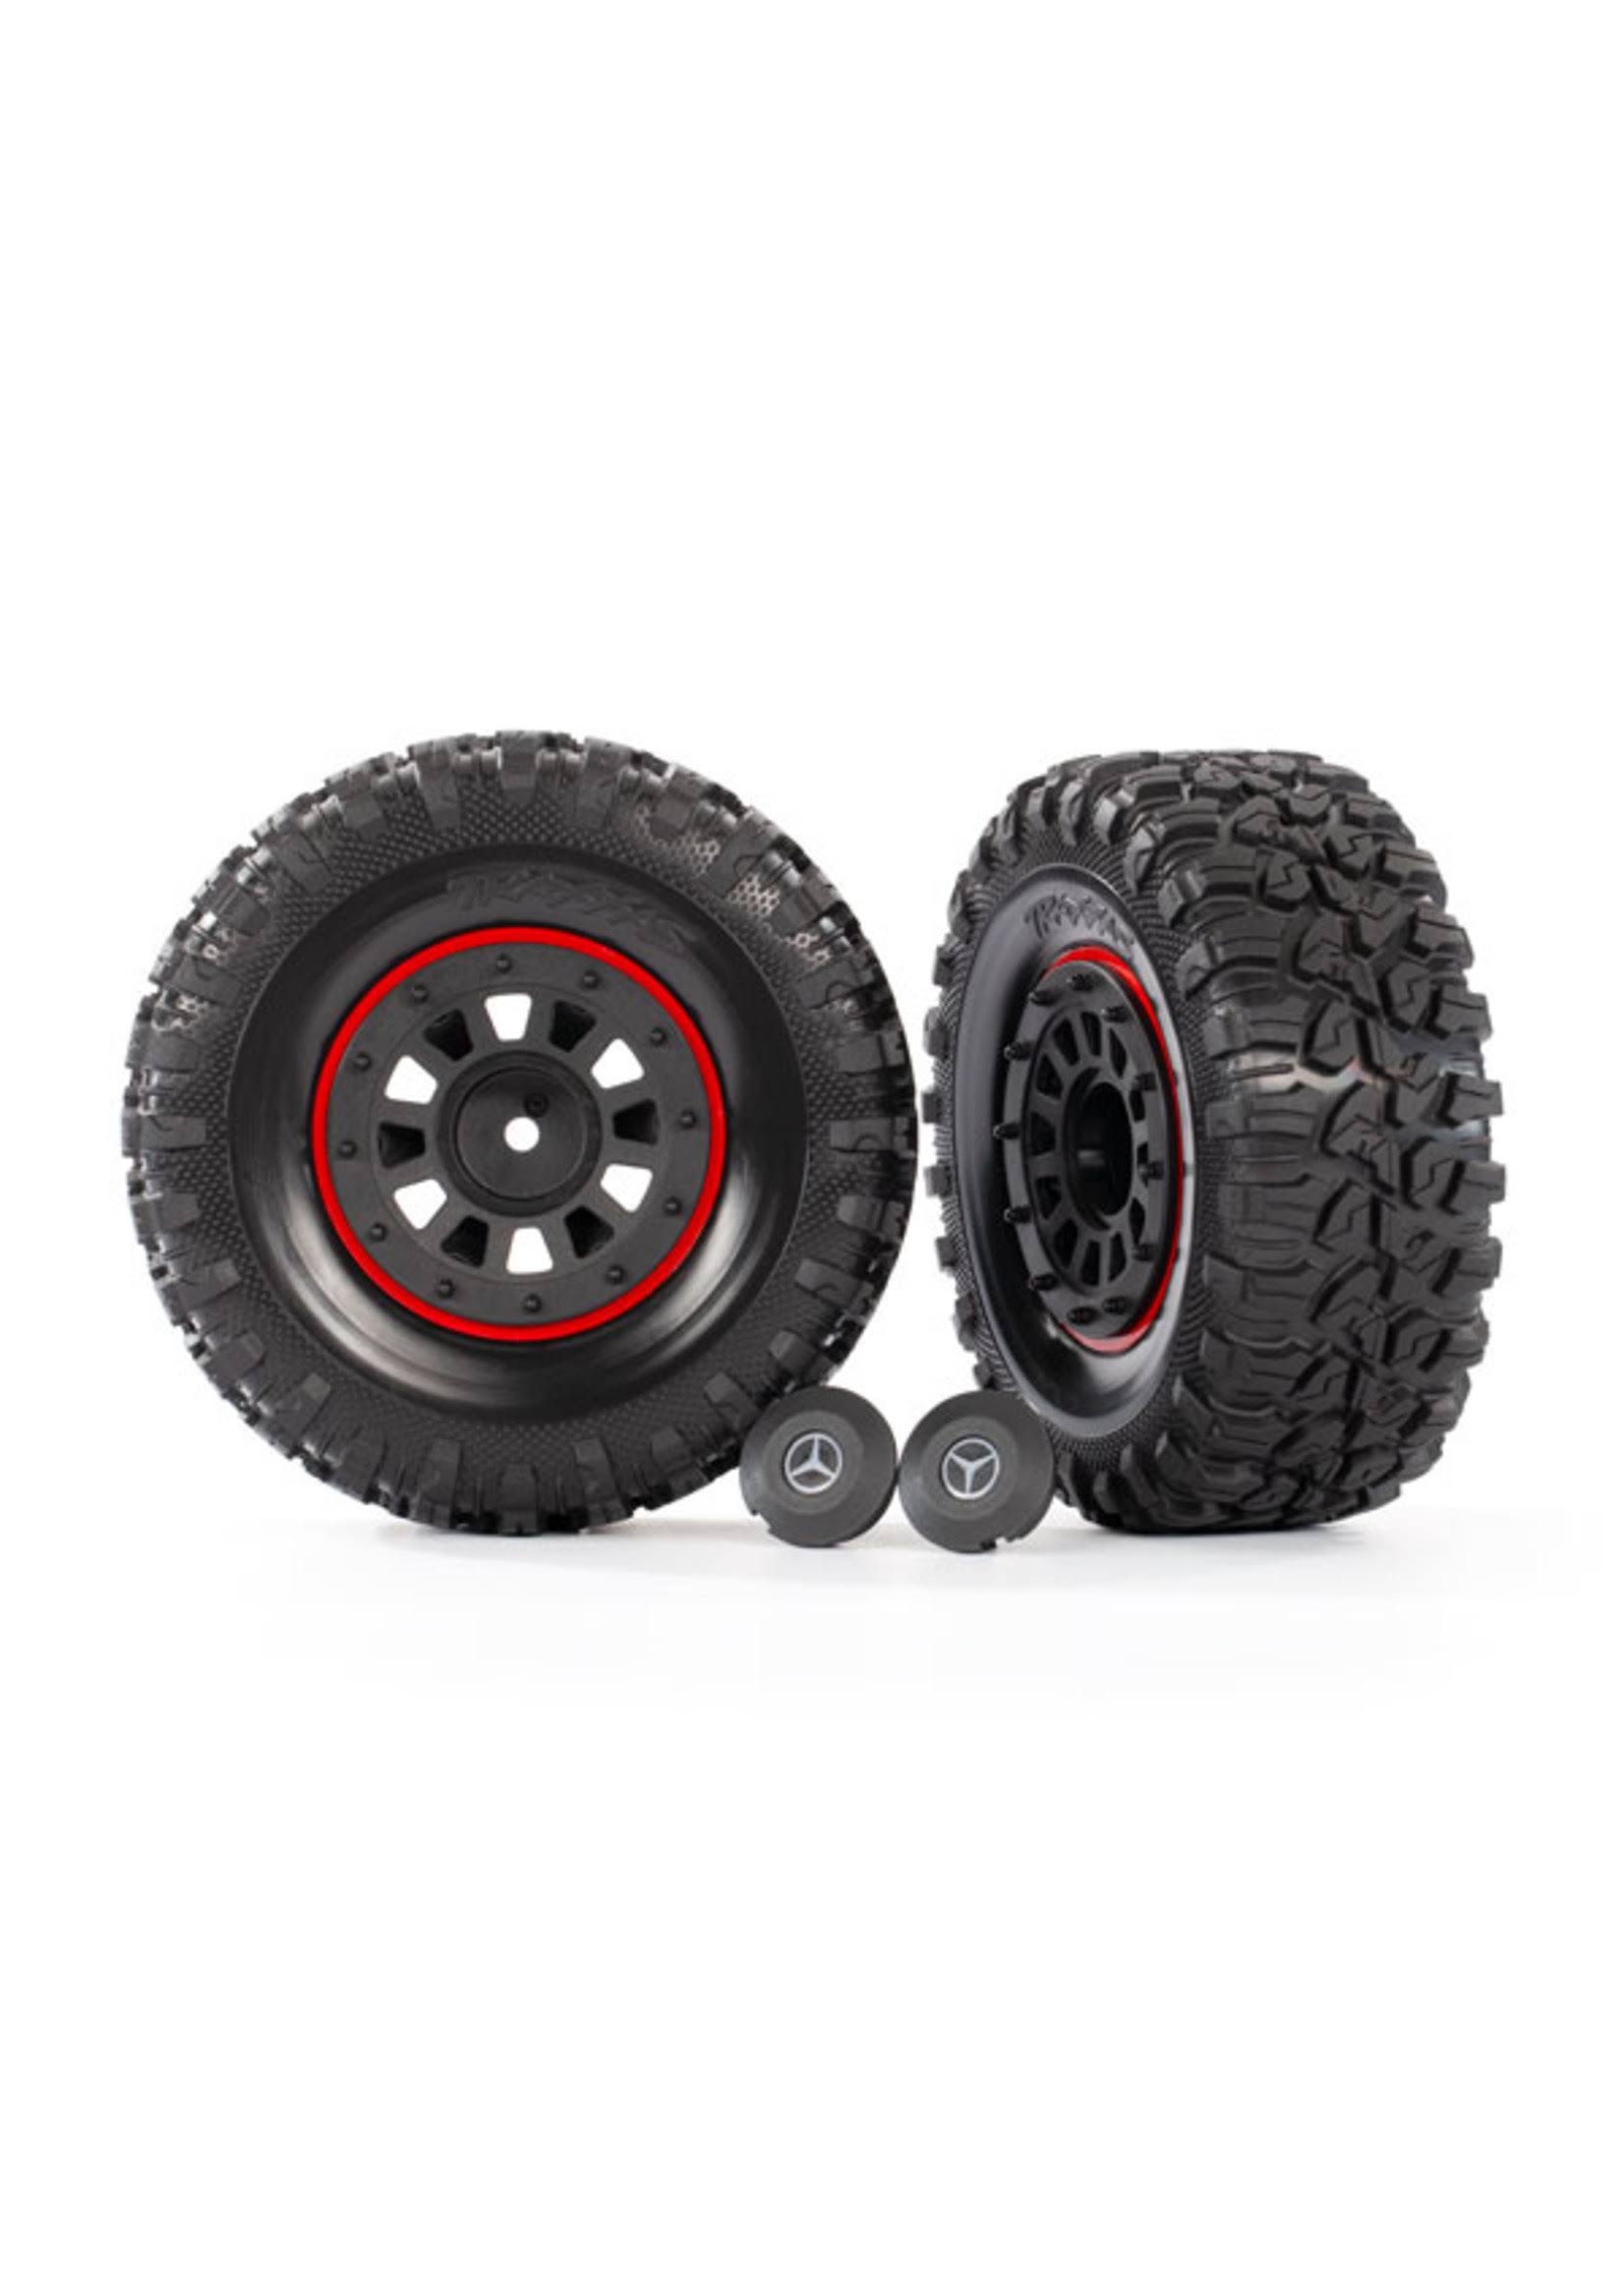 Traxxas 8874 Tires and Wheels Assembled Glued